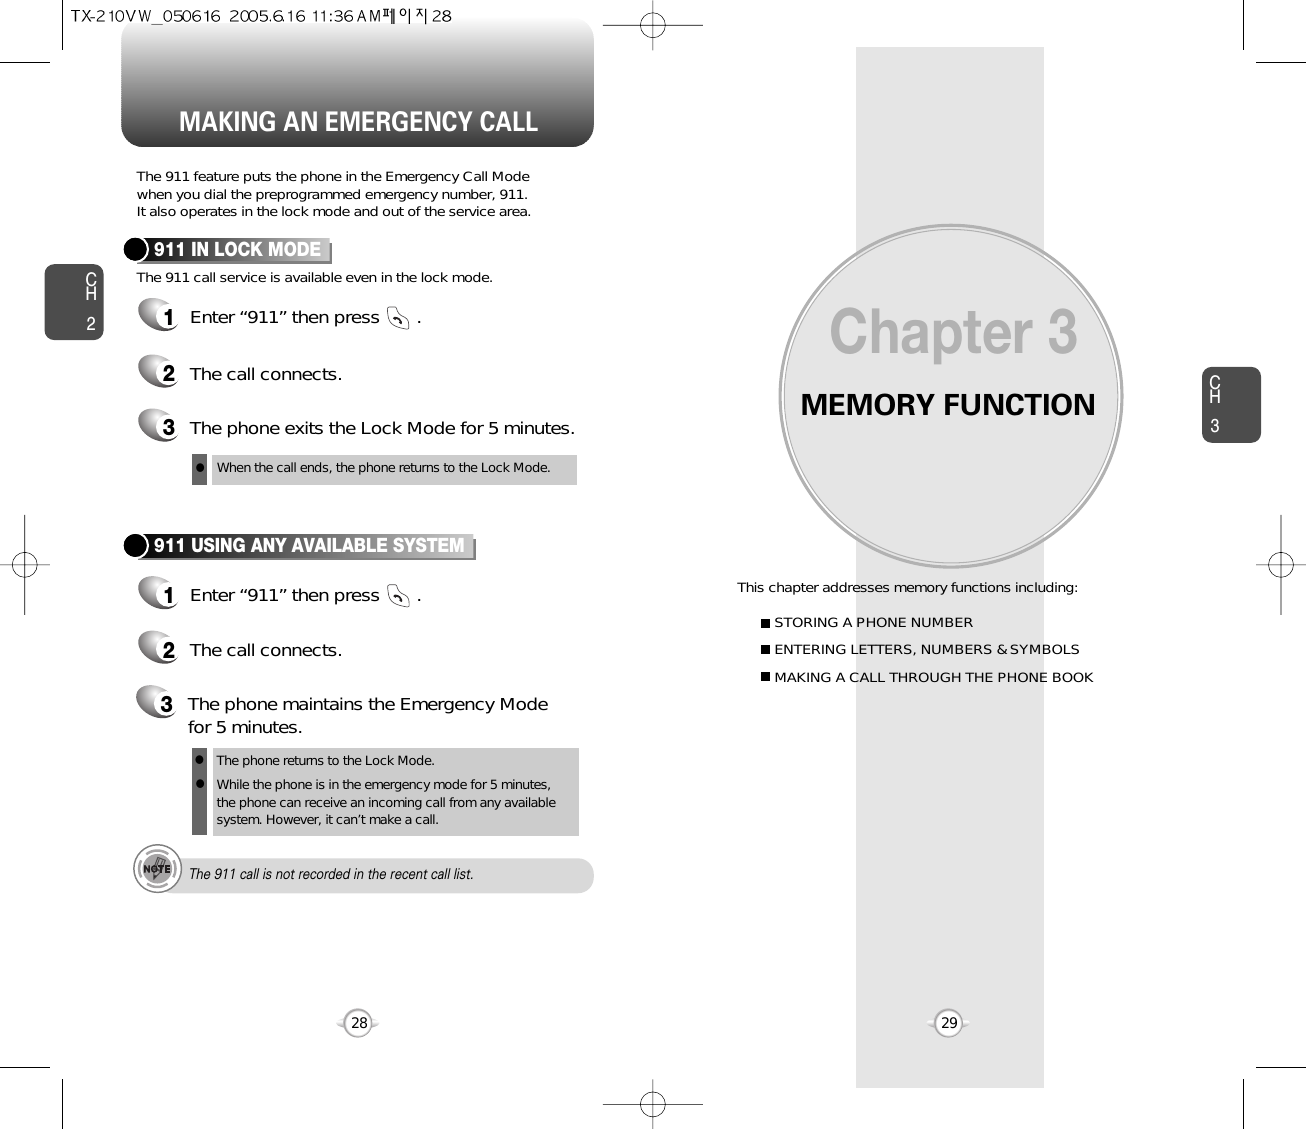 MEMORY FUNCTIONThis chapter addresses memory functions including:Chapter 3CH329MAKING AN EMERGENCY CALLCH228STORING A PHONE NUMBERENTERING LETTERS, NUMBERS &amp; SYMBOLSMAKING A CALL THROUGH THE PHONE BOOKThe 911 feature puts the phone in the Emergency Call Modewhen you dial the preprogrammed emergency number, 911. It also operates in the lock mode and out of the service area.The 911 call service is available even in the lock mode.911 IN LOCK MODE1Enter “911” then press       .When the call ends, the phone returns to the Lock Mode.2The call connects.3The phone exits the Lock Mode for 5 minutes.911 USING ANY AVAILABLE SYSTEM1Enter “911” then press       .The phone returns to the Lock Mode.While the phone is in the emergency mode for 5 minutes,the phone can receive an incoming call from any availablesystem. However, it can’t make a call.2The call connects.3The phone maintains the Emergency Modefor 5 minutes.lllThe 911 call is not recorded in the recent call list.